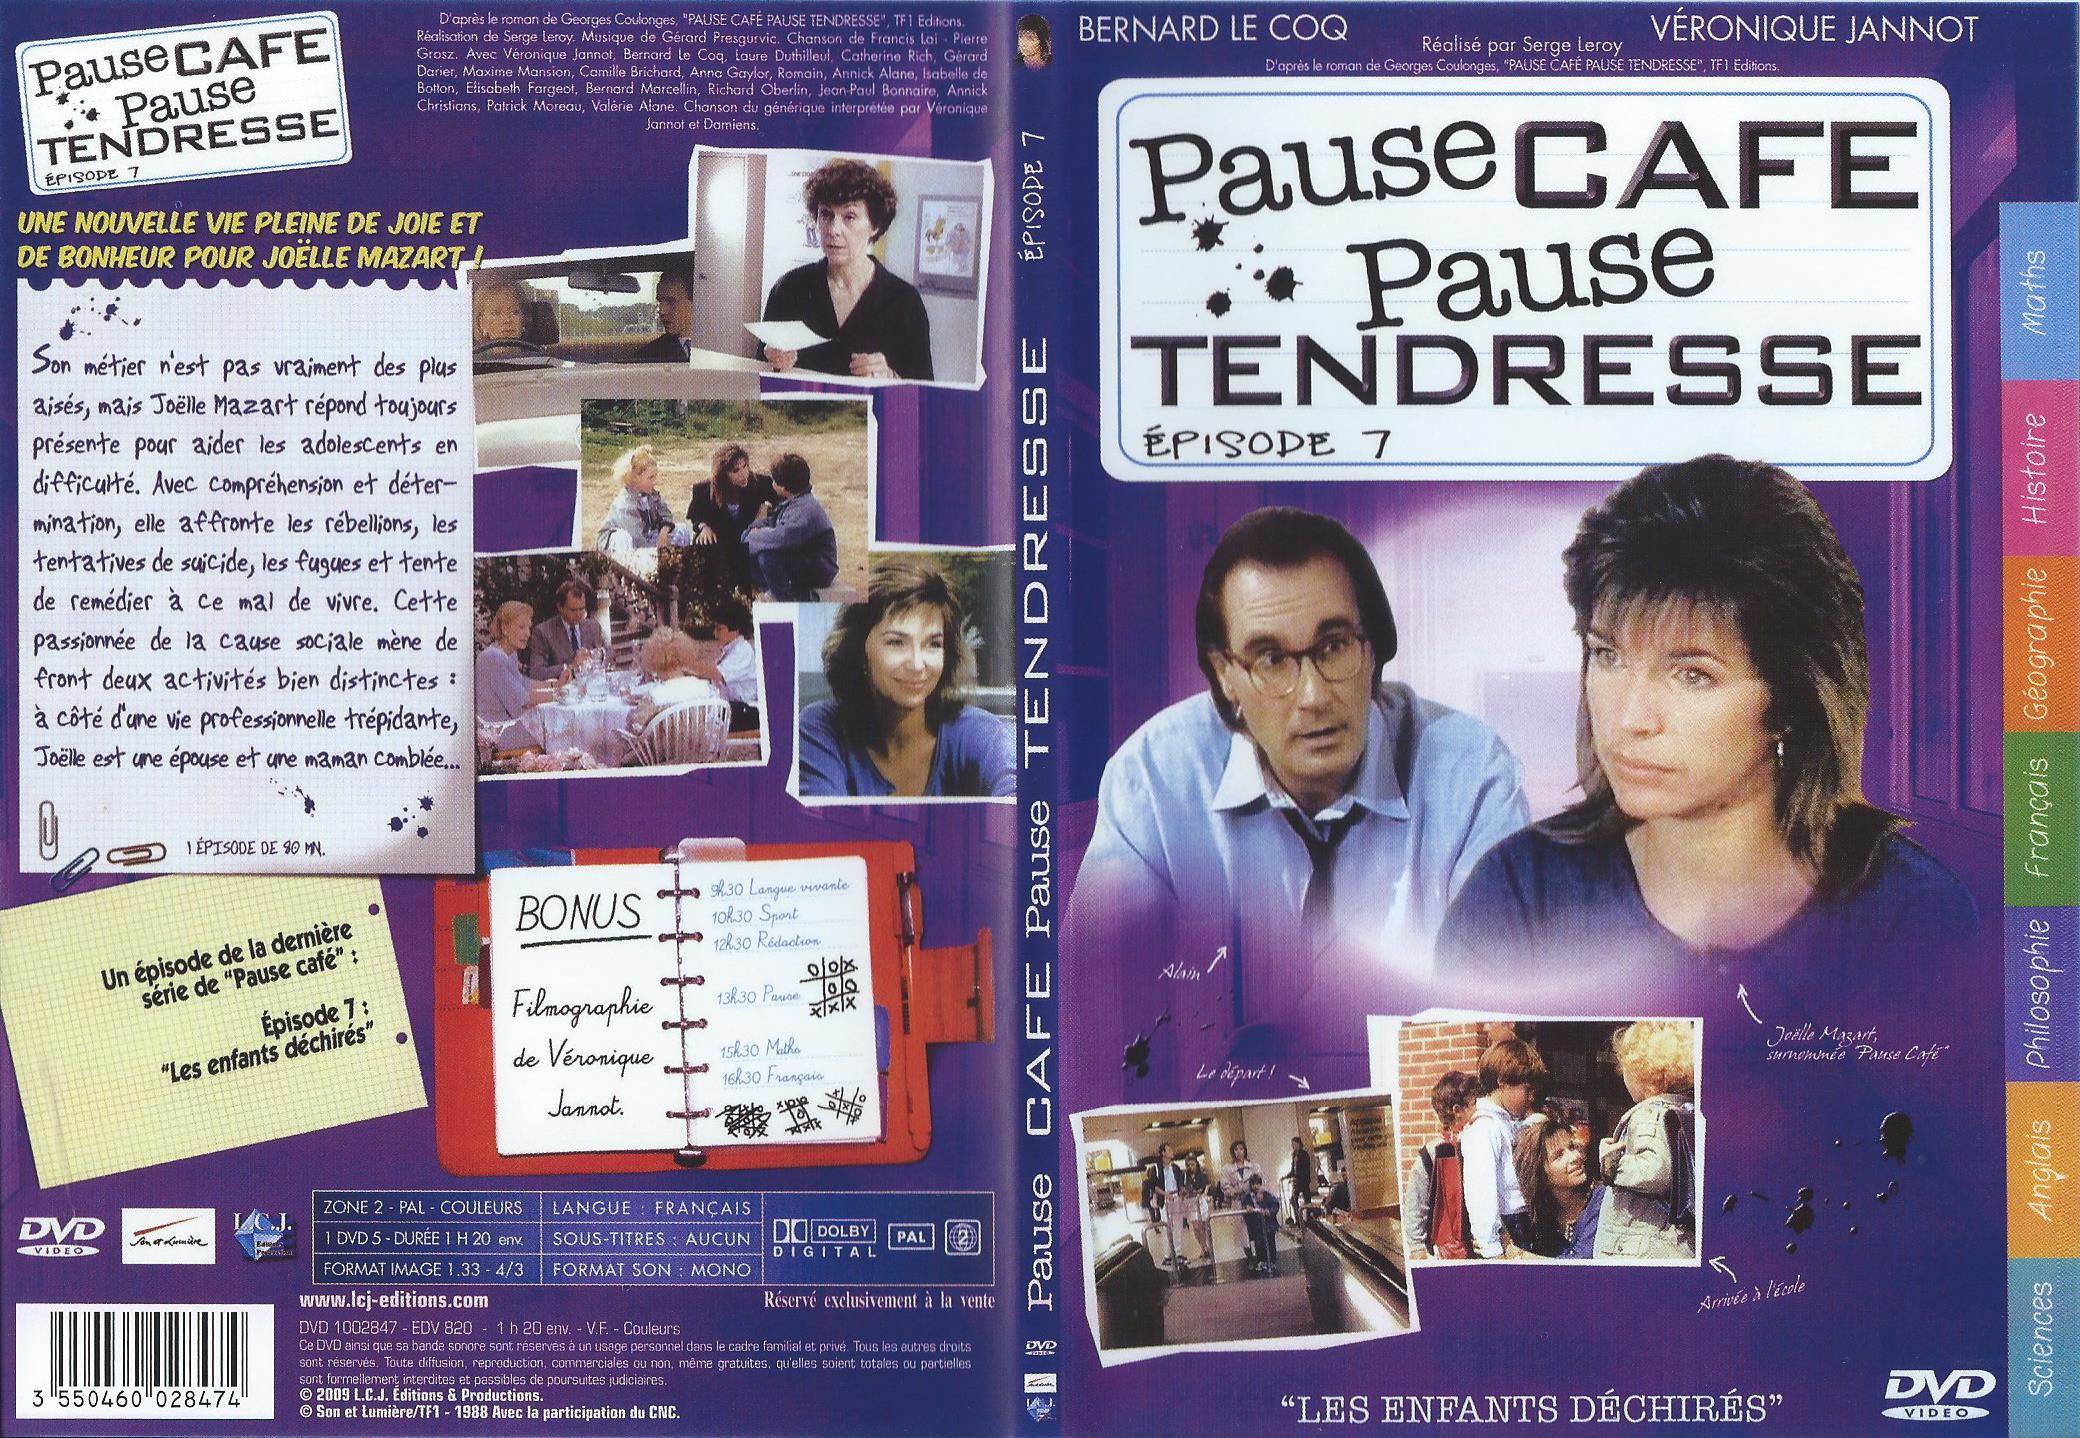 Jaquette DVD Pause Caf, Pause Tendresse DVD 7